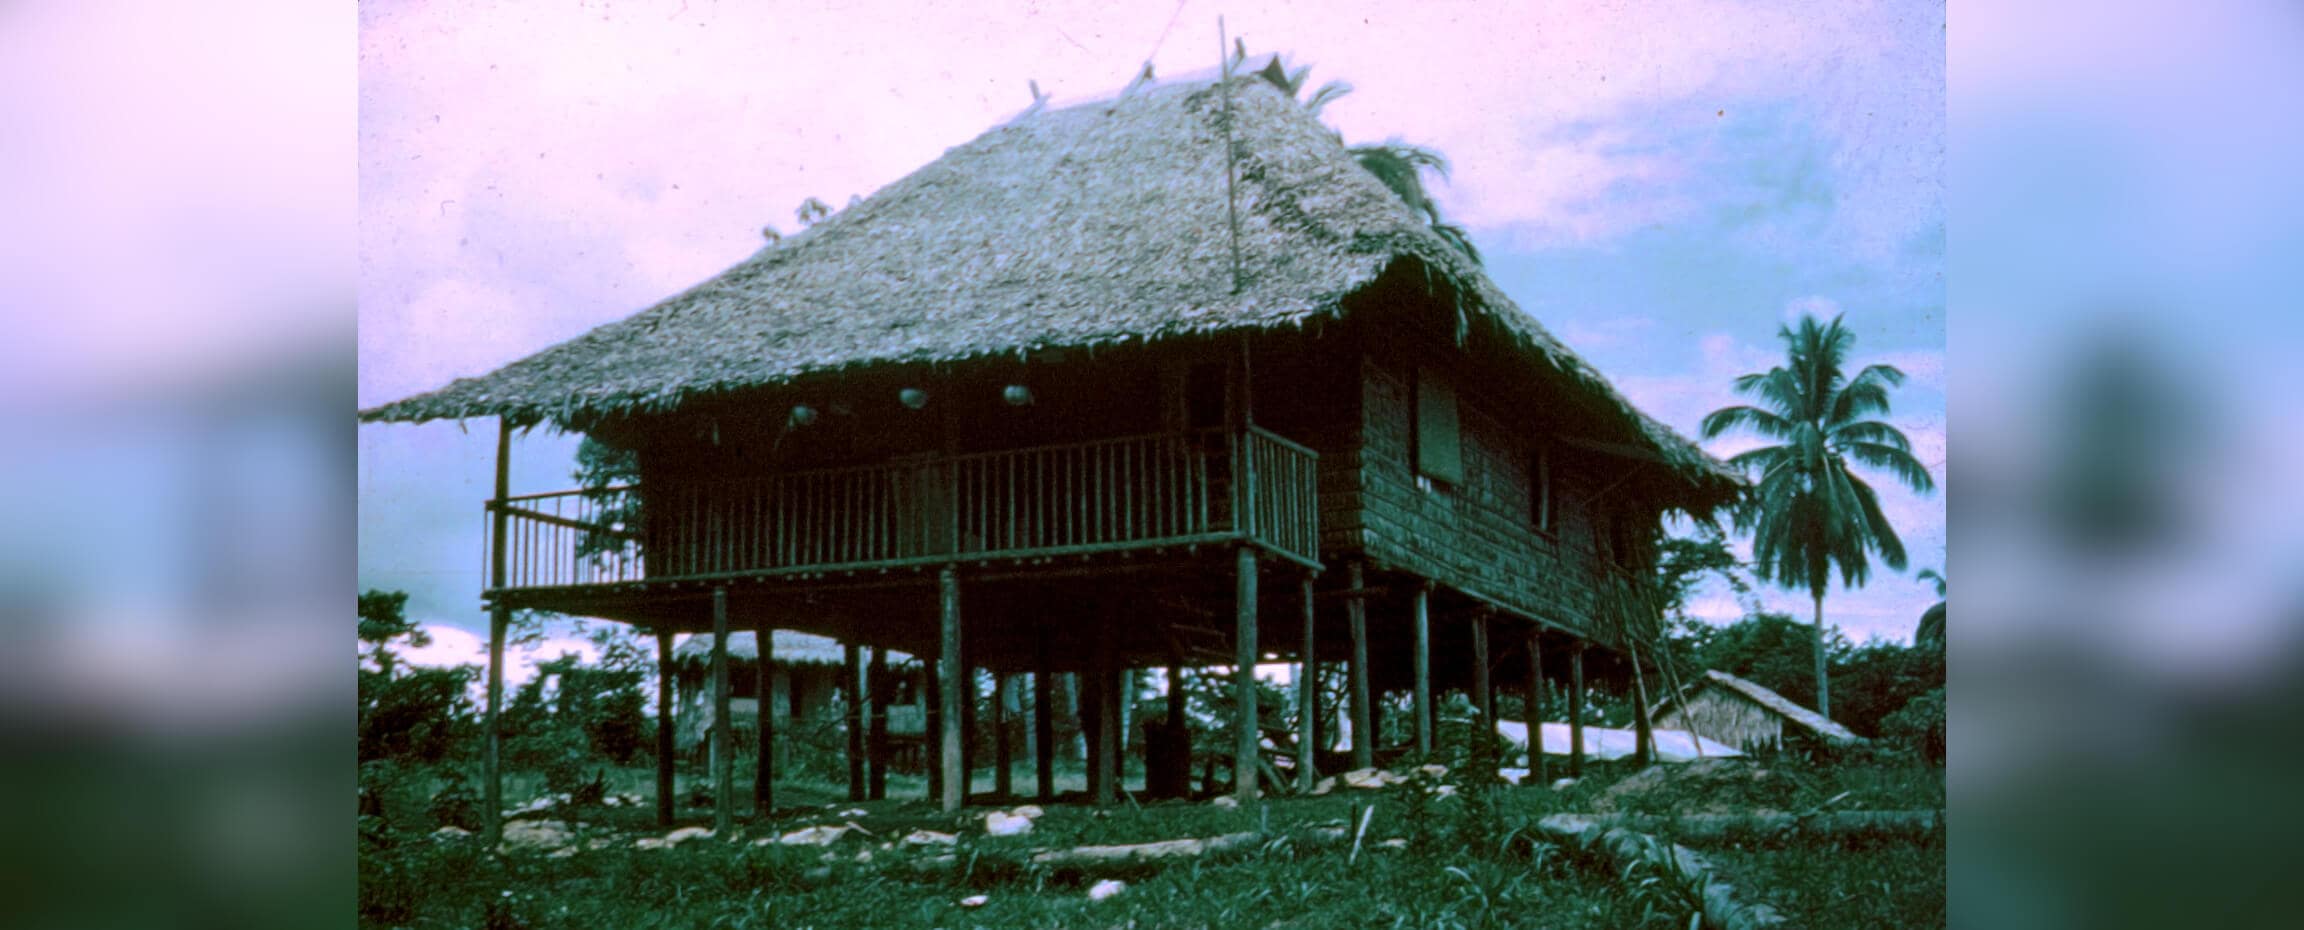 Old photo of a nipa hut in the jungle